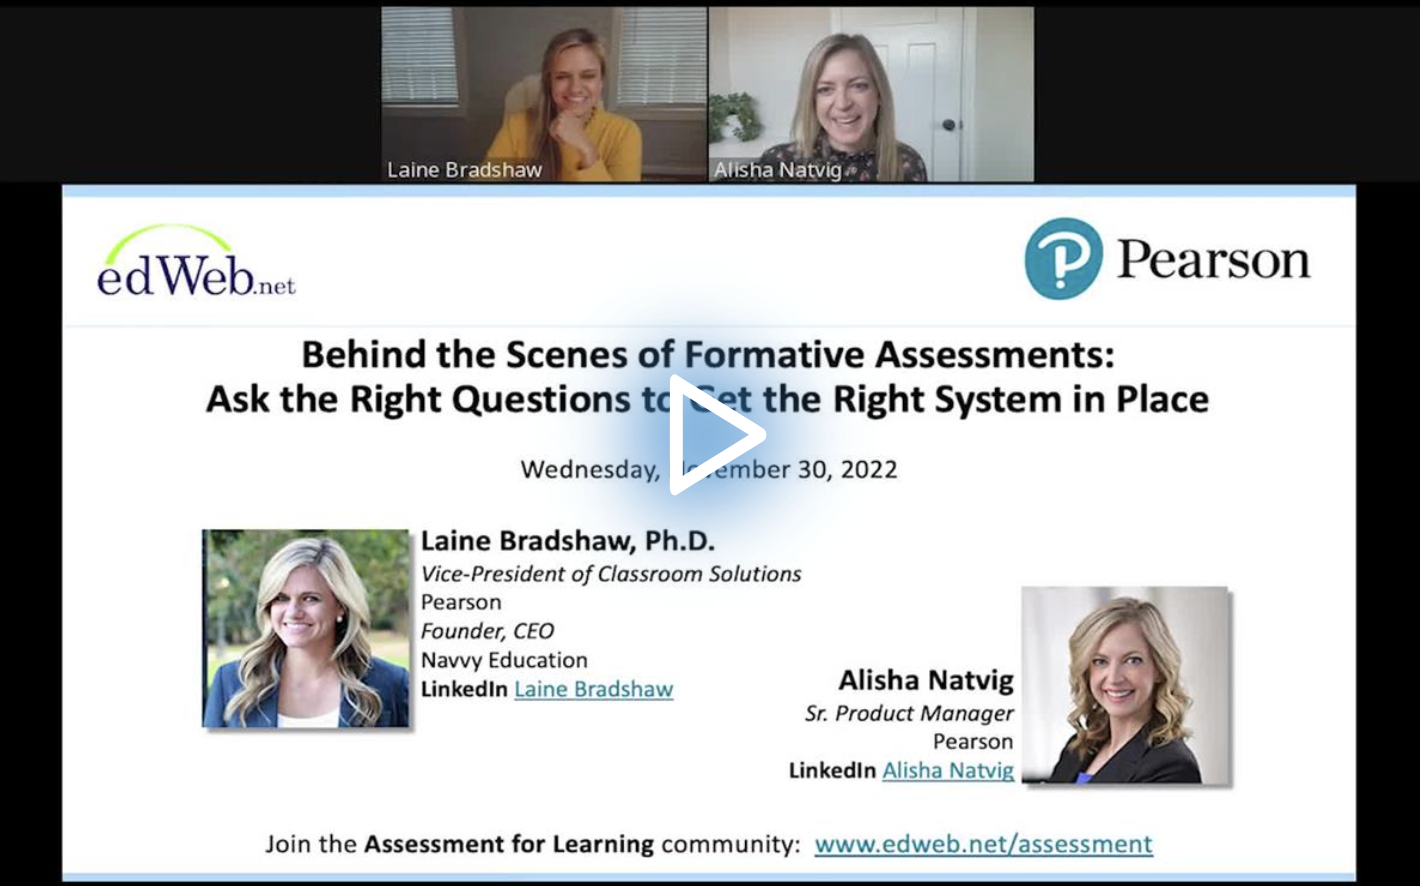 Behind the Scenes of Formative Assessments: Ask the Right Questions to Get the Right System in Place edLeader Panel recording screenshot